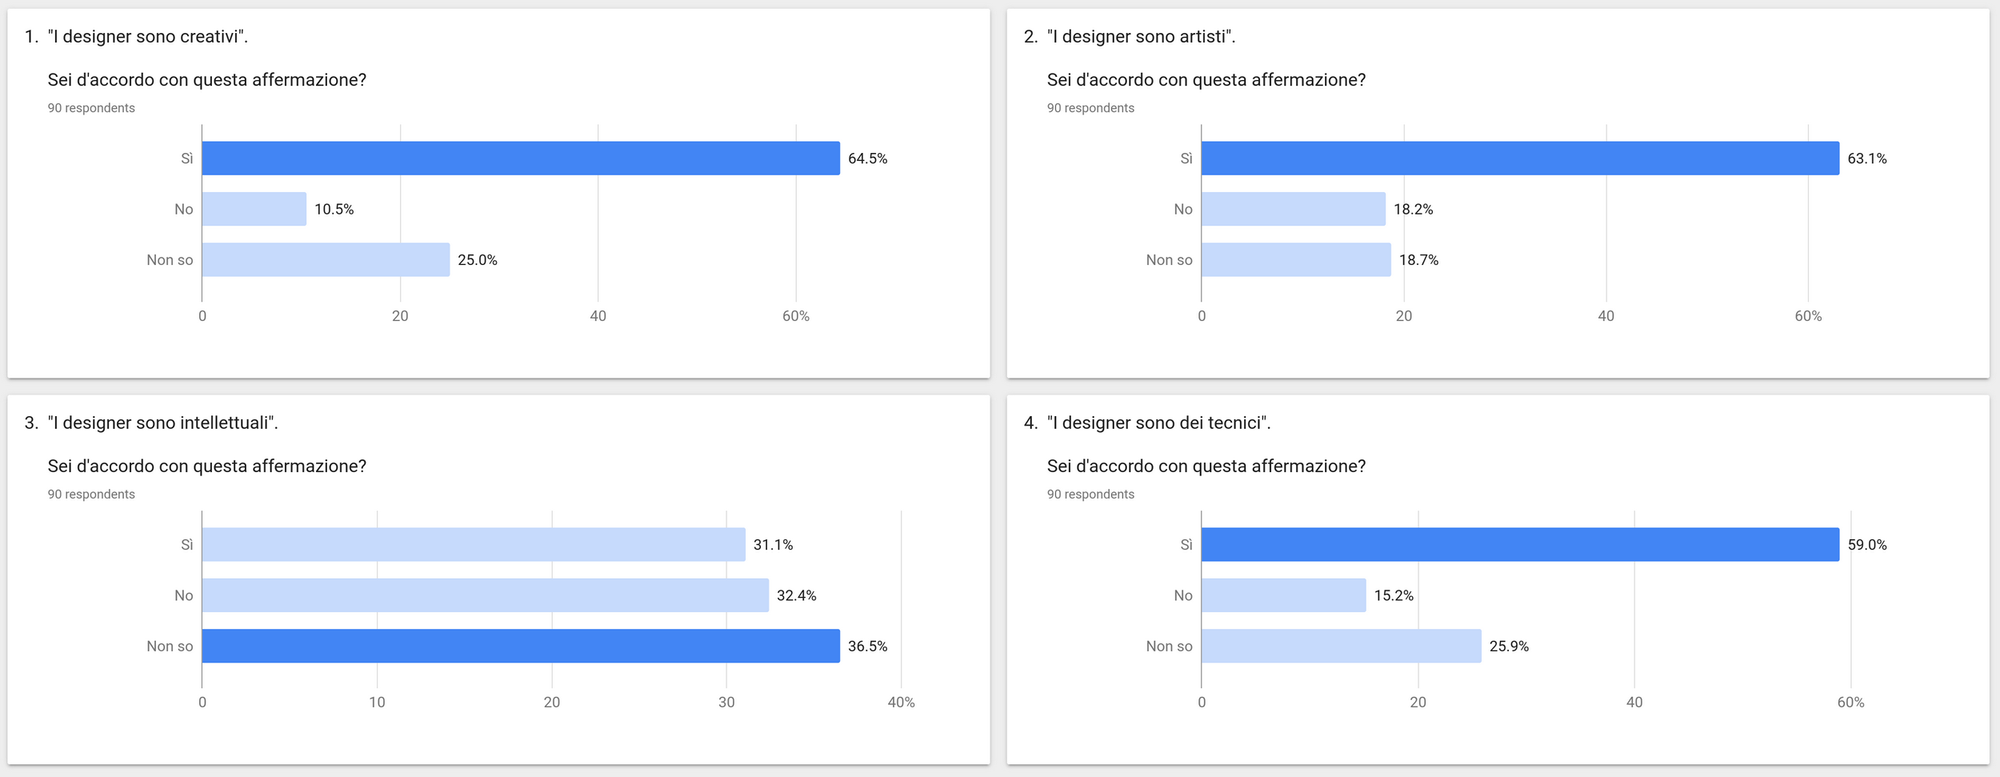 Survey conducted on a general sample of one hundred participants. The figure of the designer is primarily linked to the sphere of art and creativity. Participants also do not hesitate to consider the designer a technician. Instead there are clear doubts with respect to the designer as an intellectual.